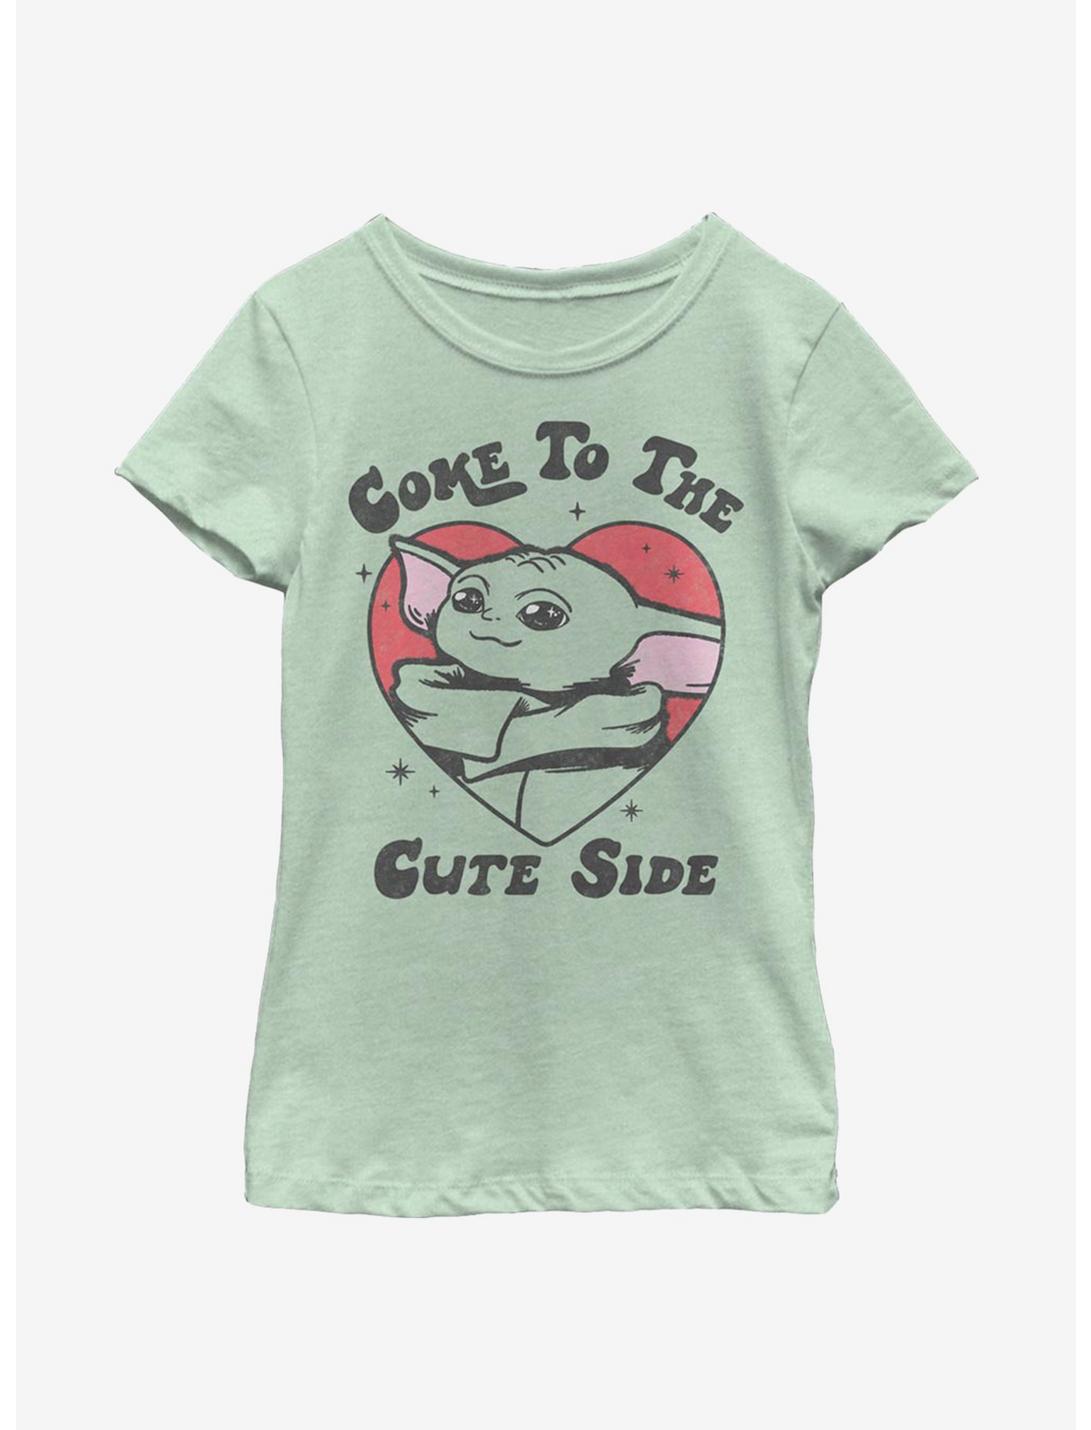 Star Wars The Mandalorian The Child Come To The Cute Side Youth Girls T-Shirt, MINT, hi-res